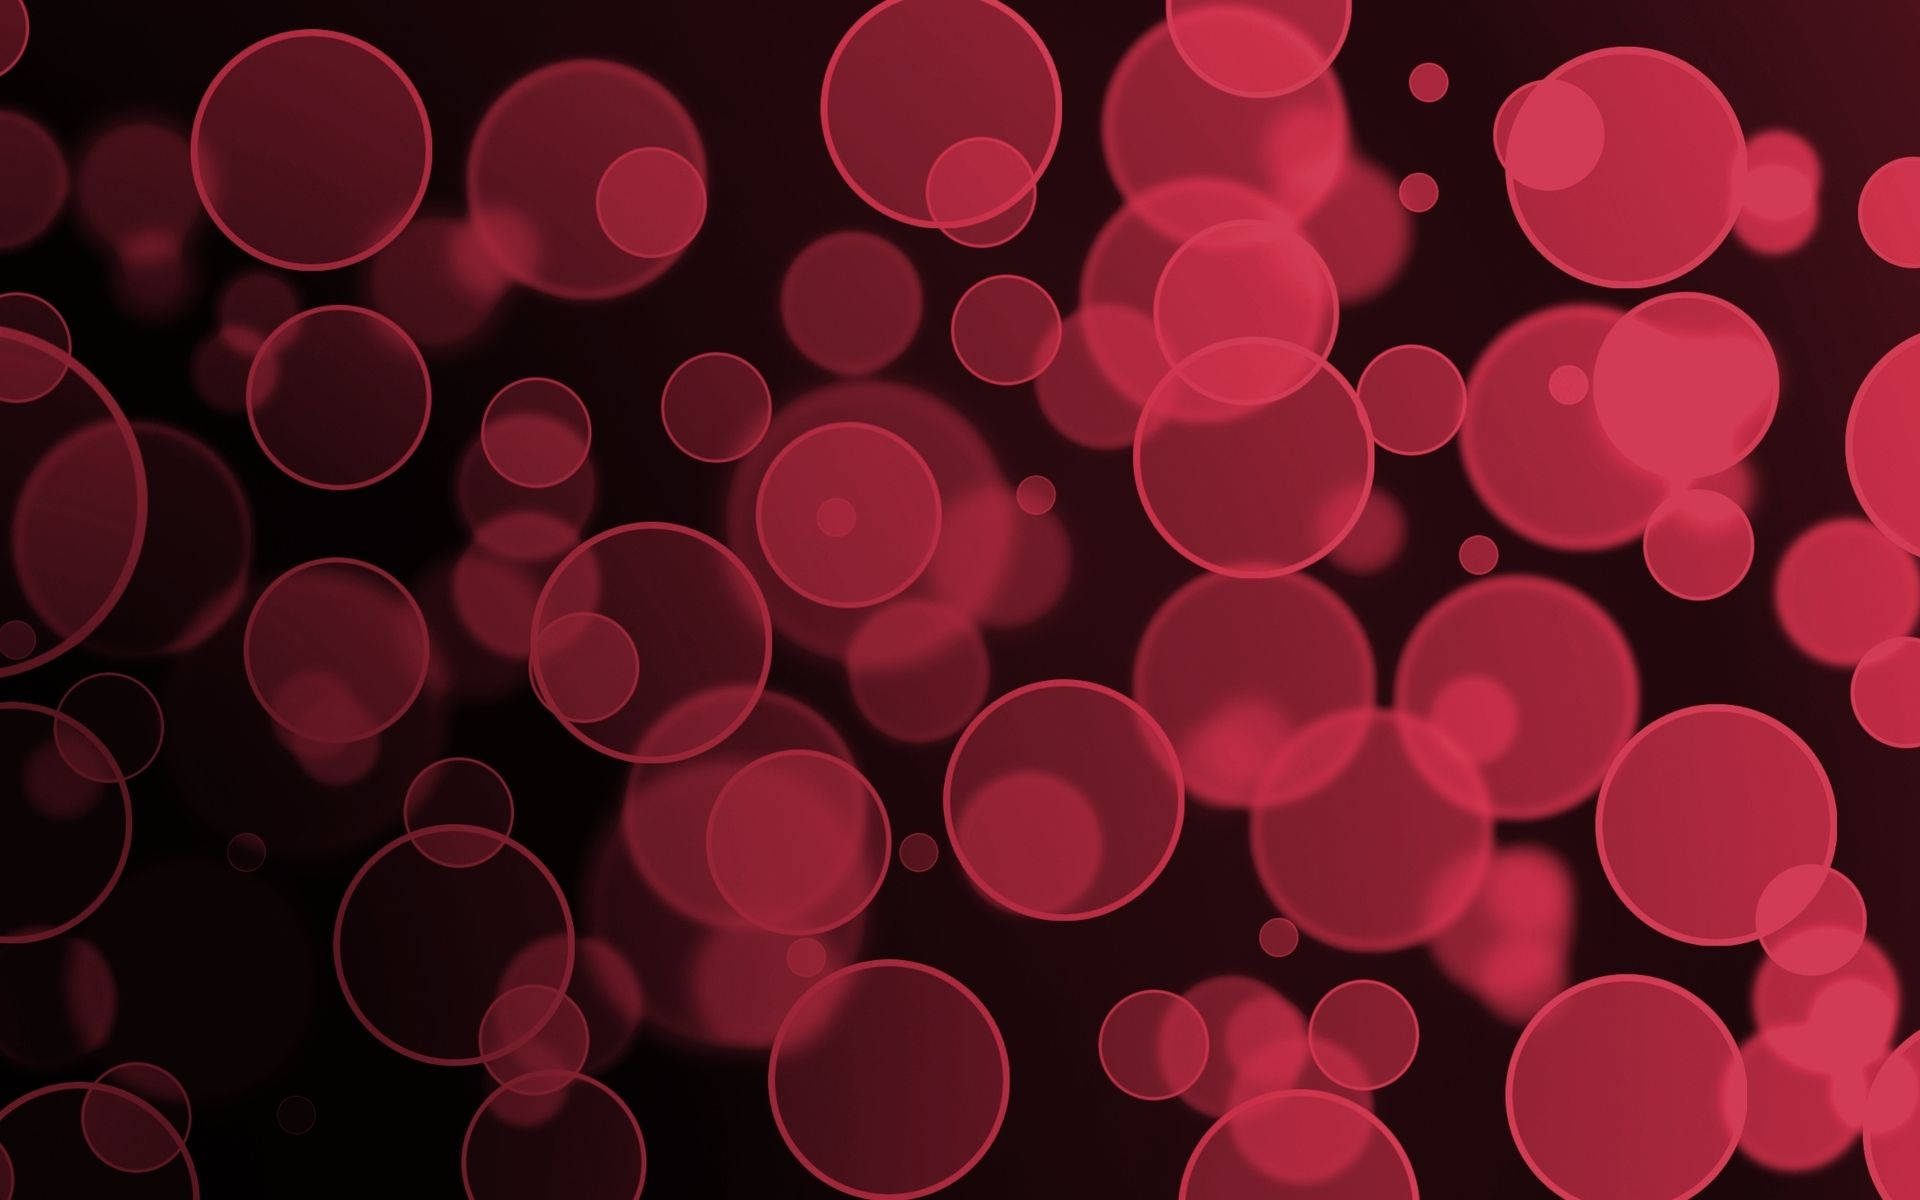 Red Circle Like Red Blood Cells Background